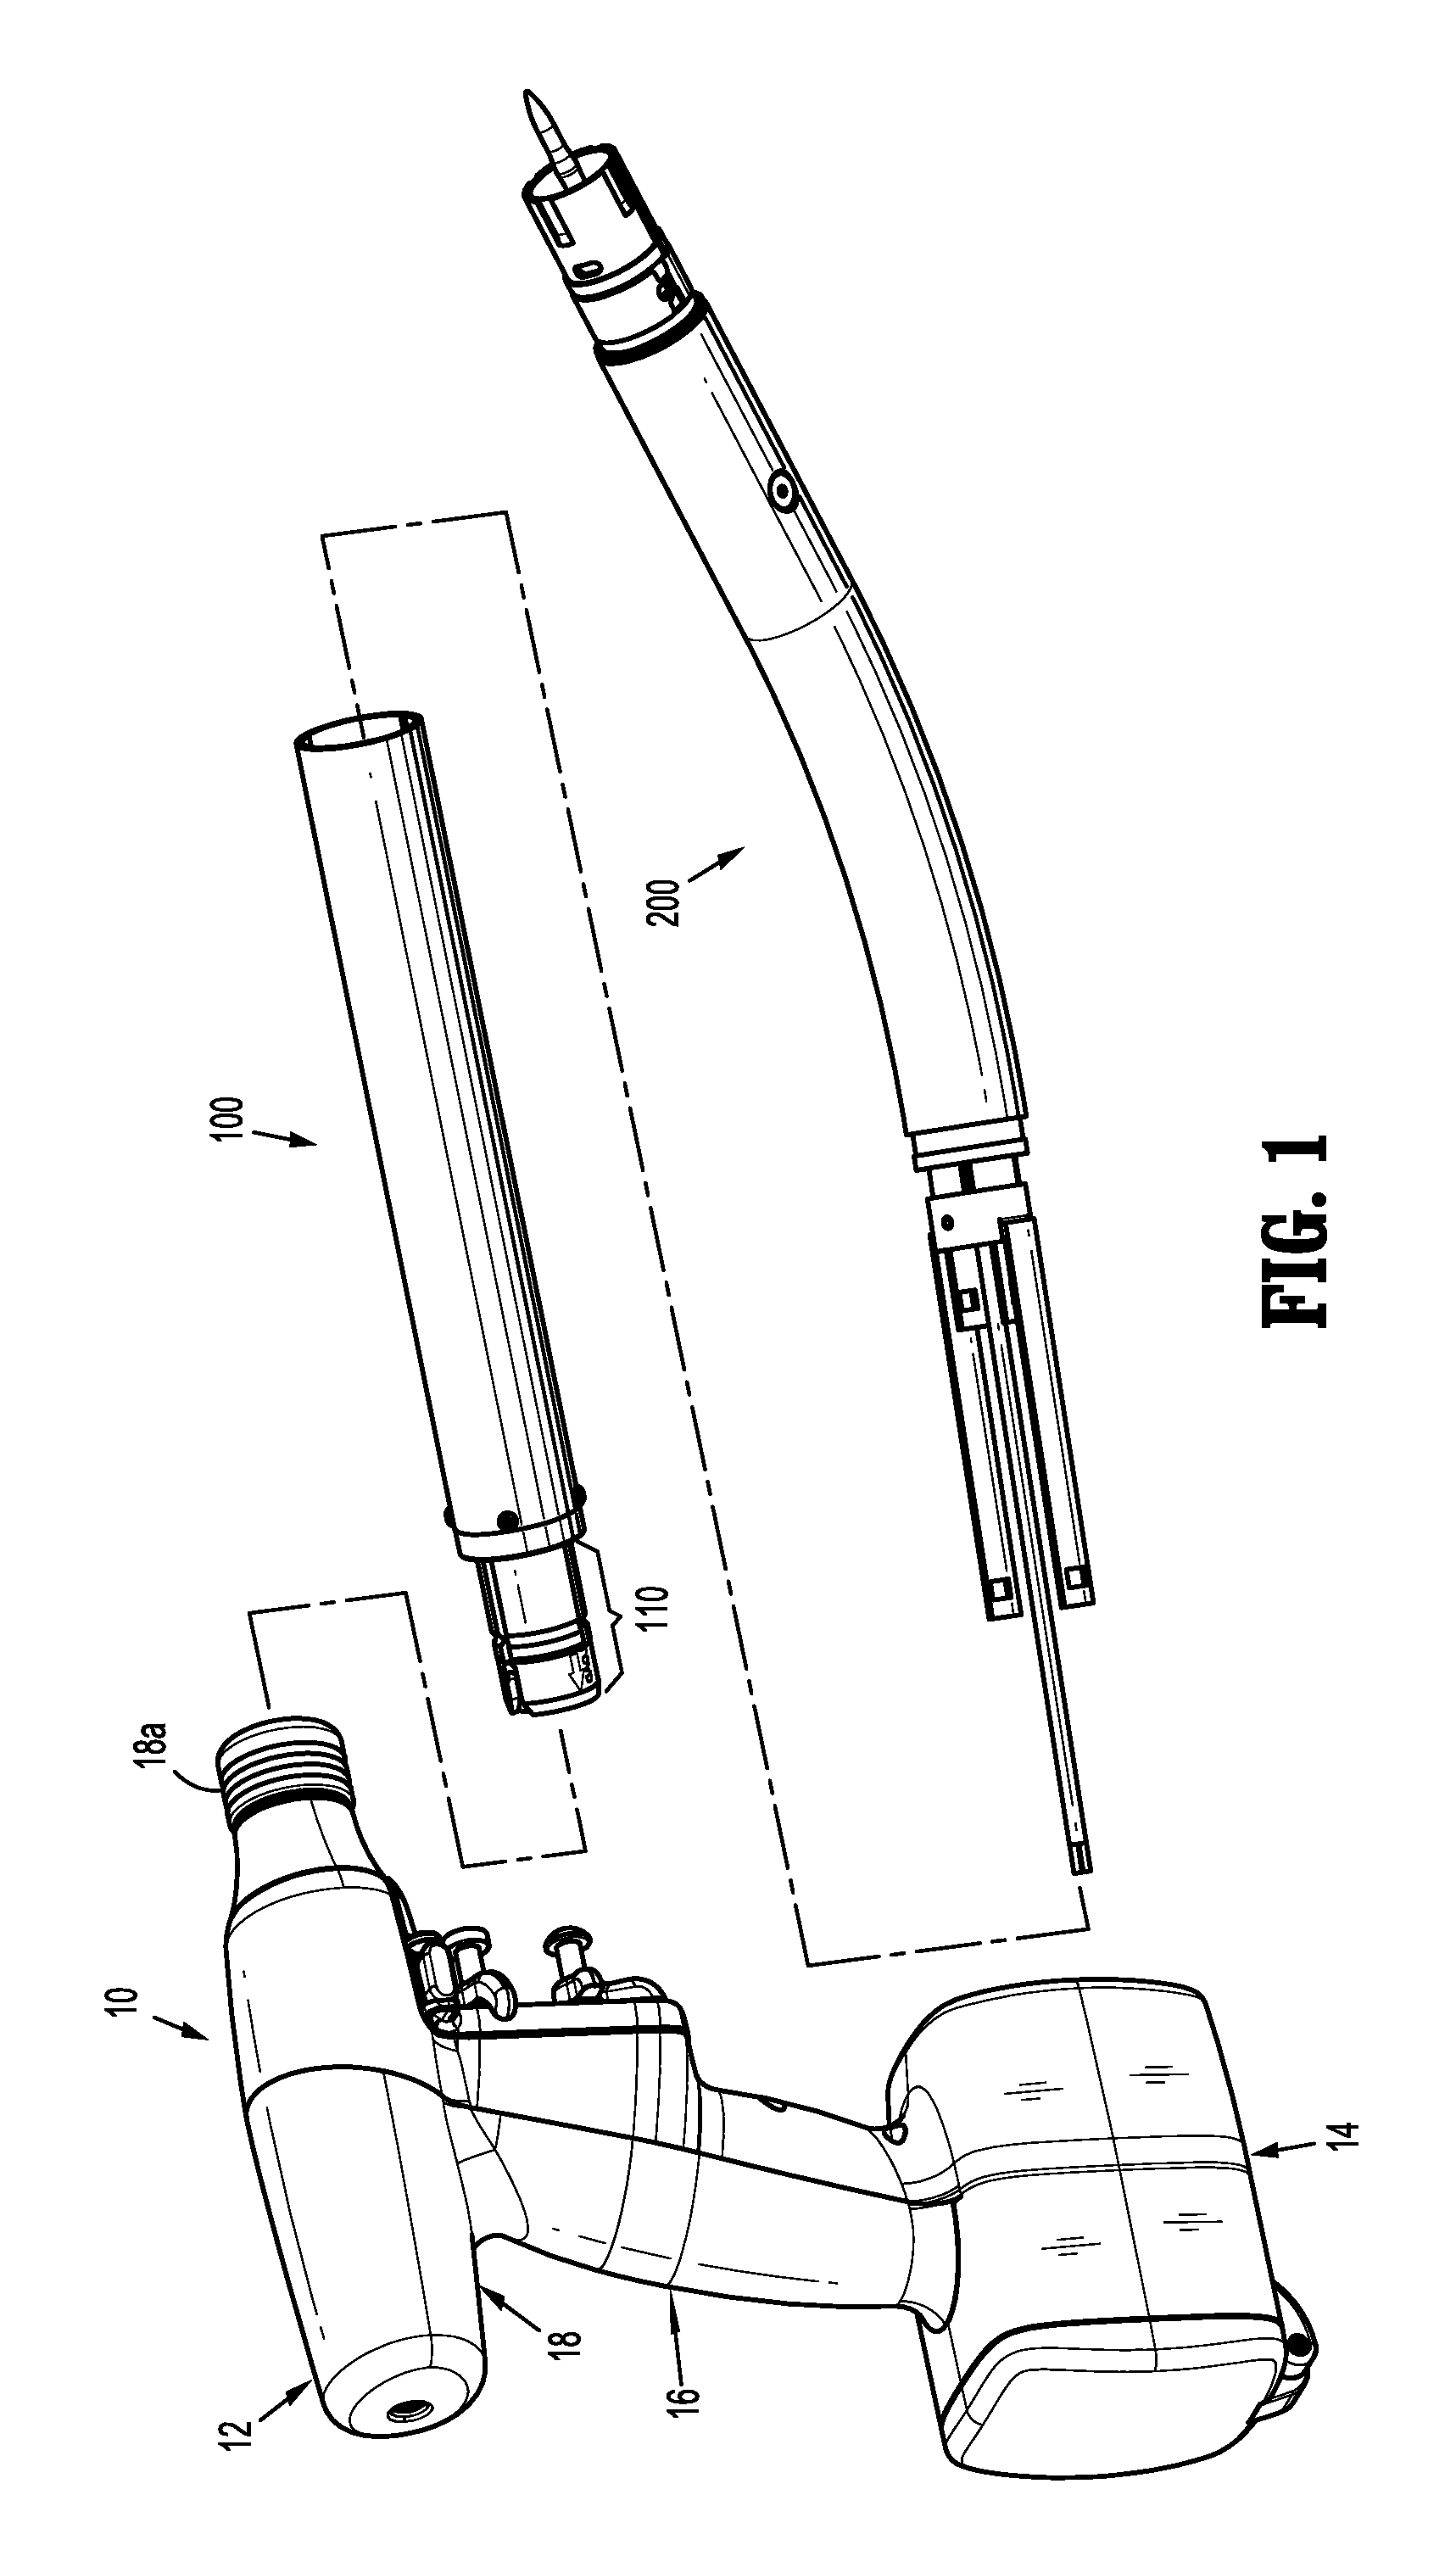 Adapter, extension, and connector assemblies for surgical devices